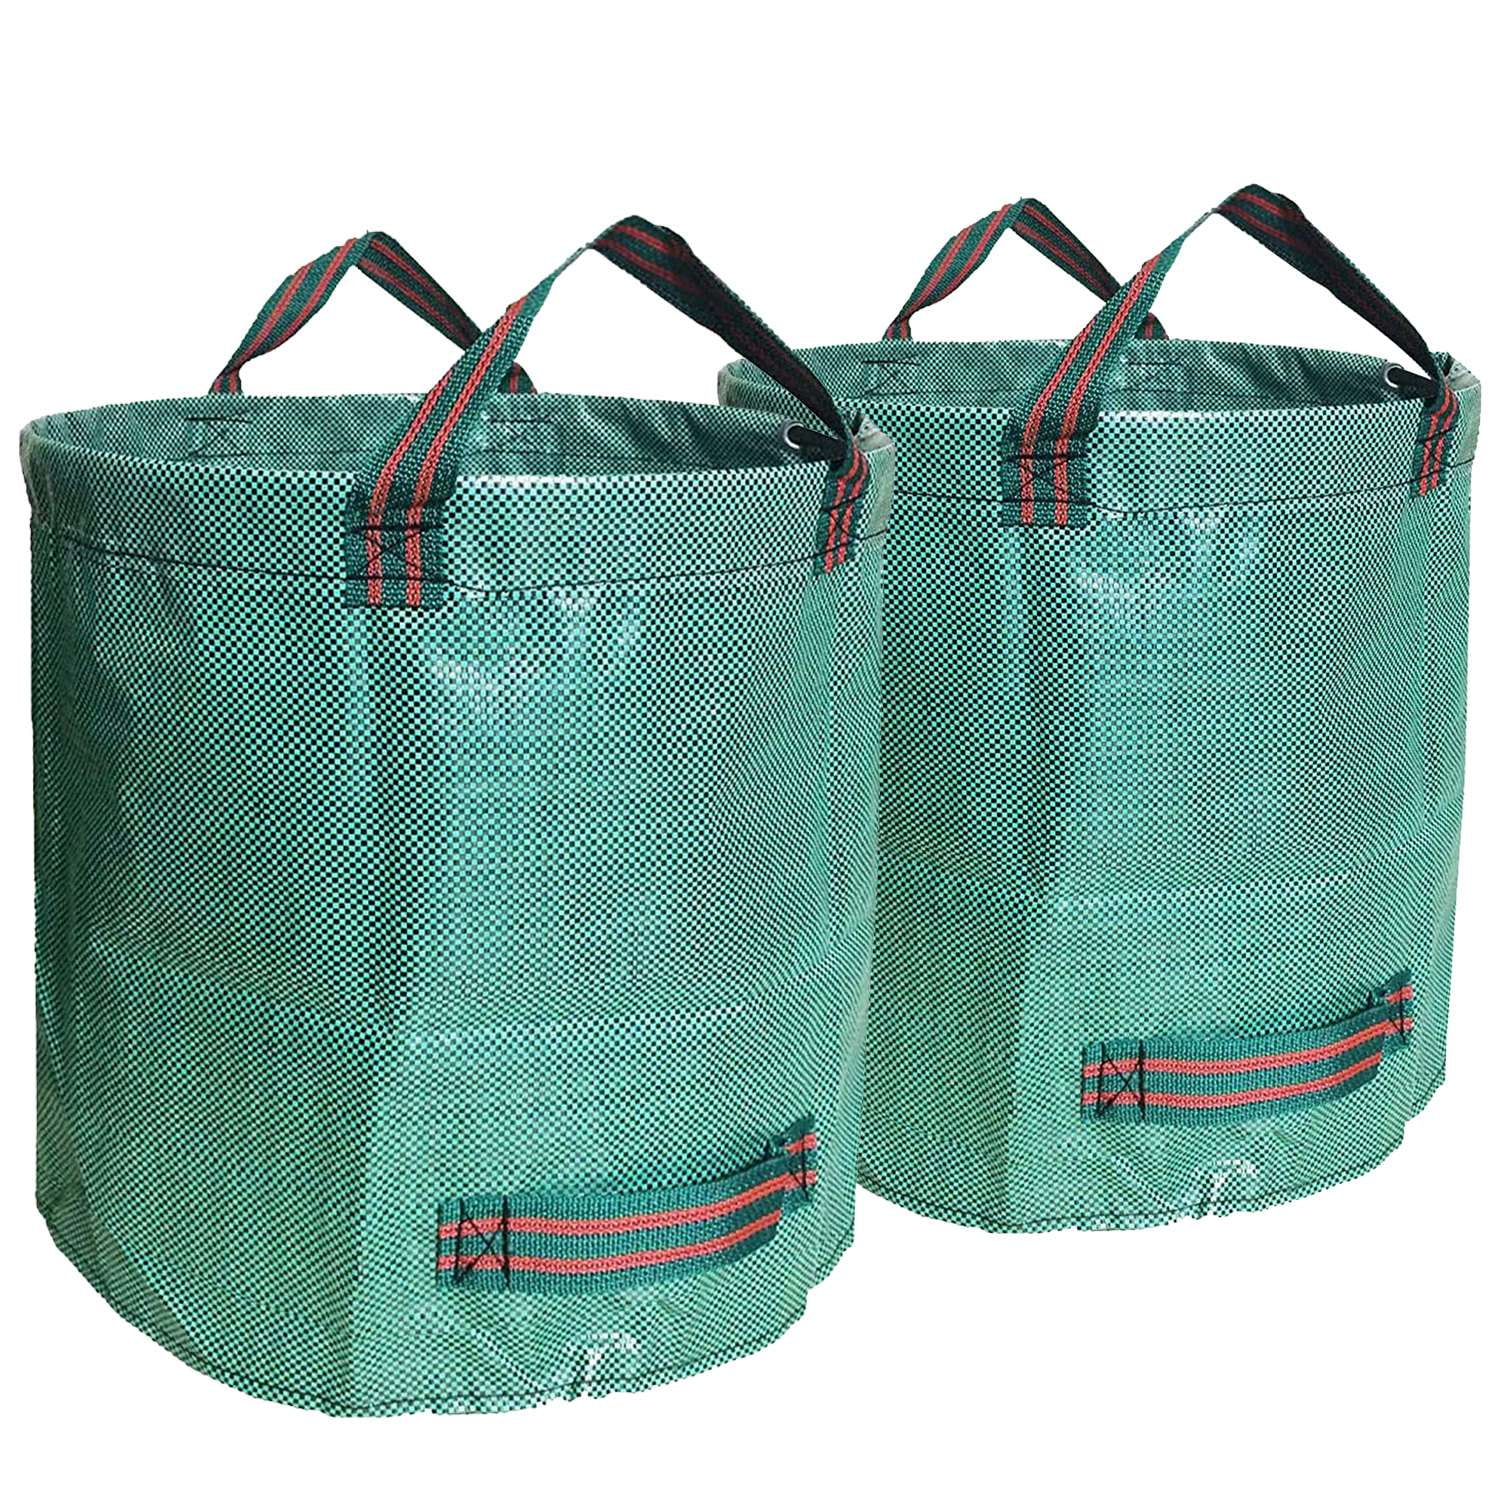 72 Gallons Leaf Bag Reusable Gardening Bags with Handles Self Collapsible Lawn and Yard Garden Waste Bag 2 Pack Garden Bags 